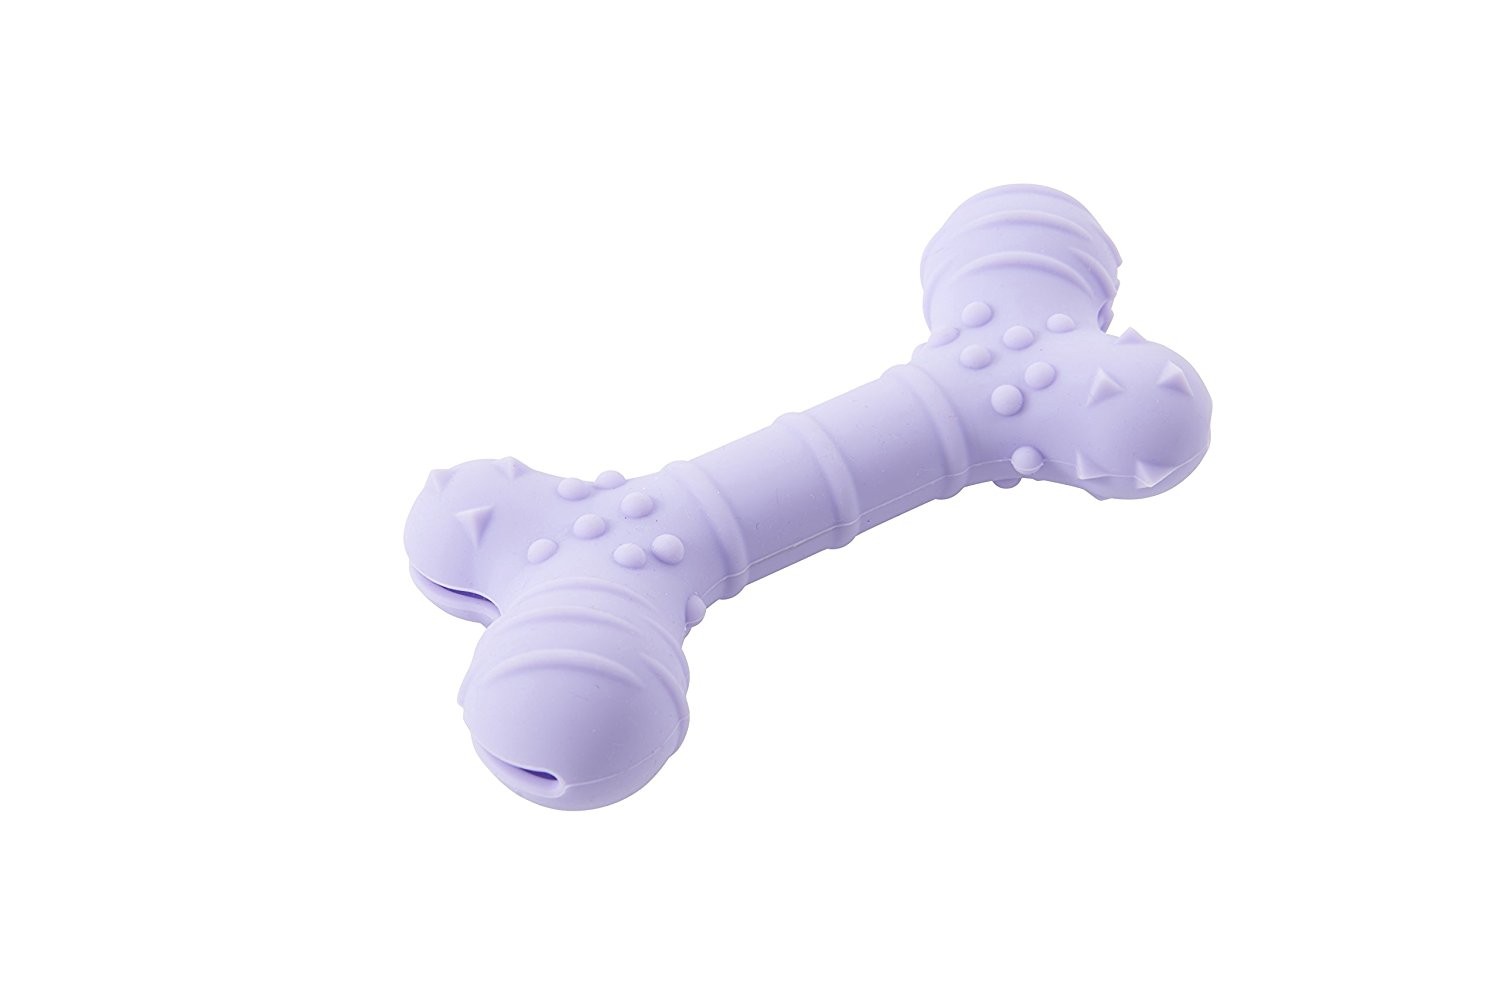 BUSTER Flex Bone soft & flexible silicone Fill toy with food treats can be froze (Purple)